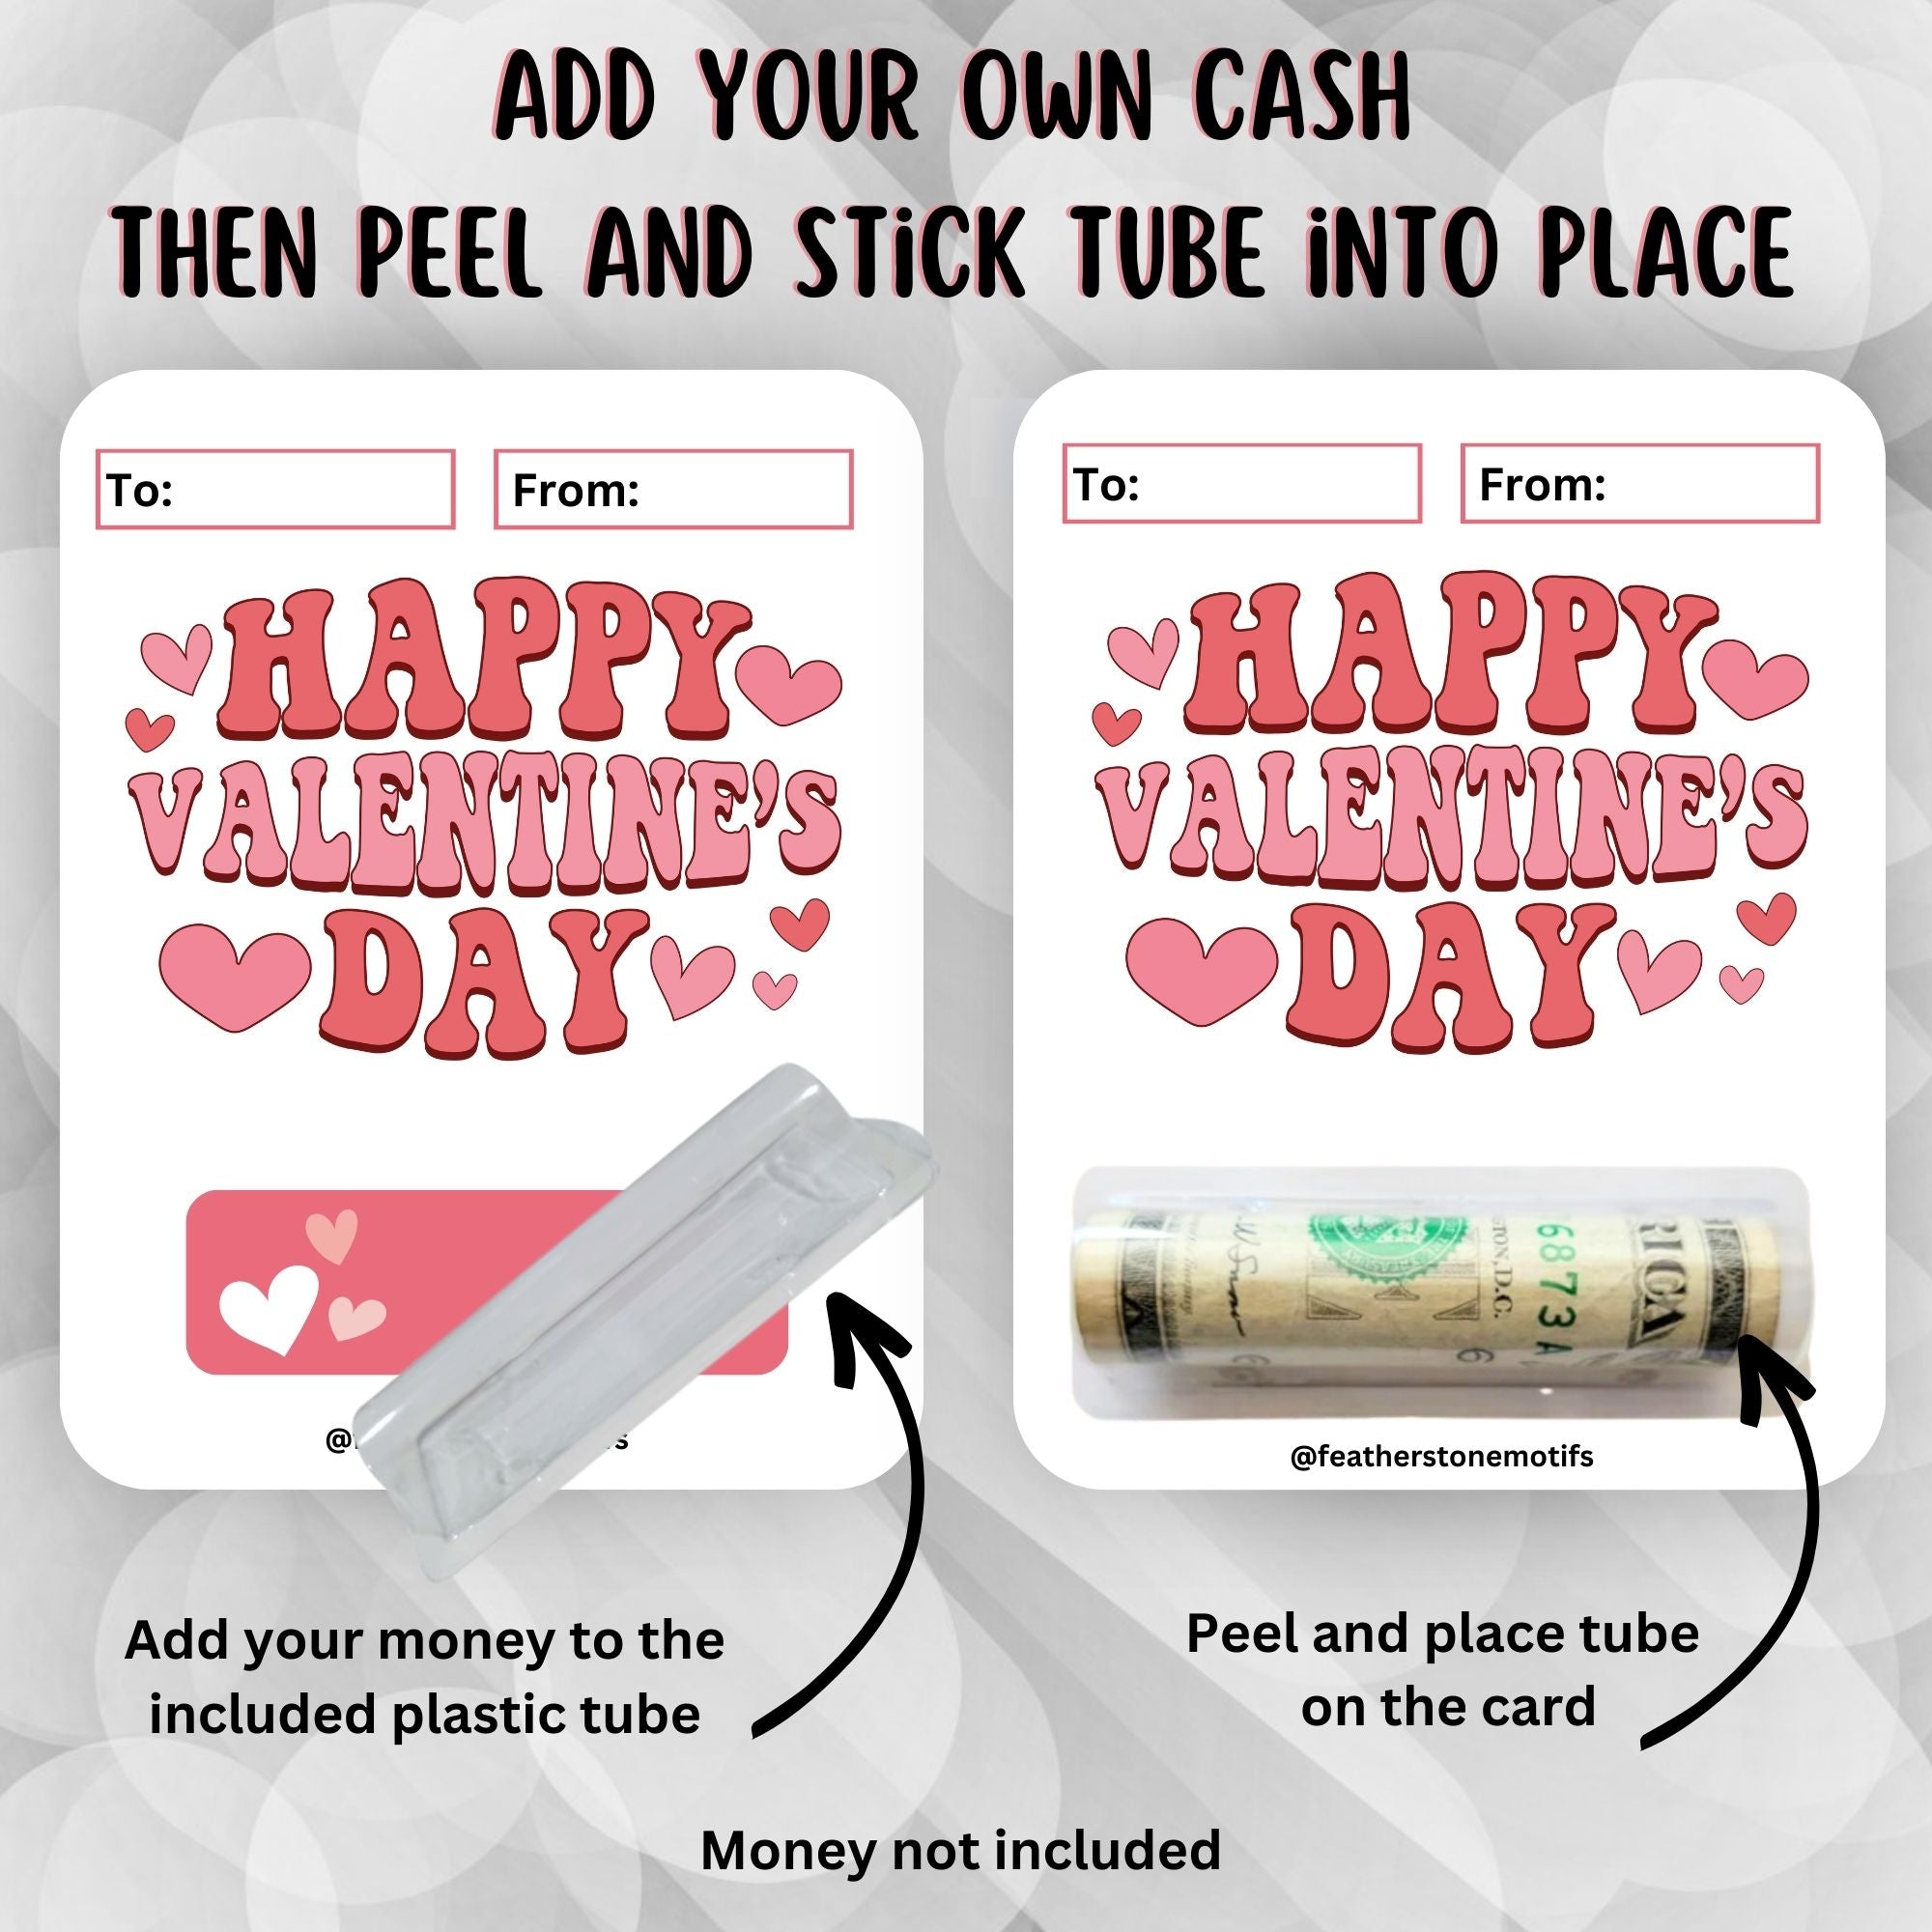 This image shows how to attach the money tube to the Happy Valentine's Day Valentine Money Card.